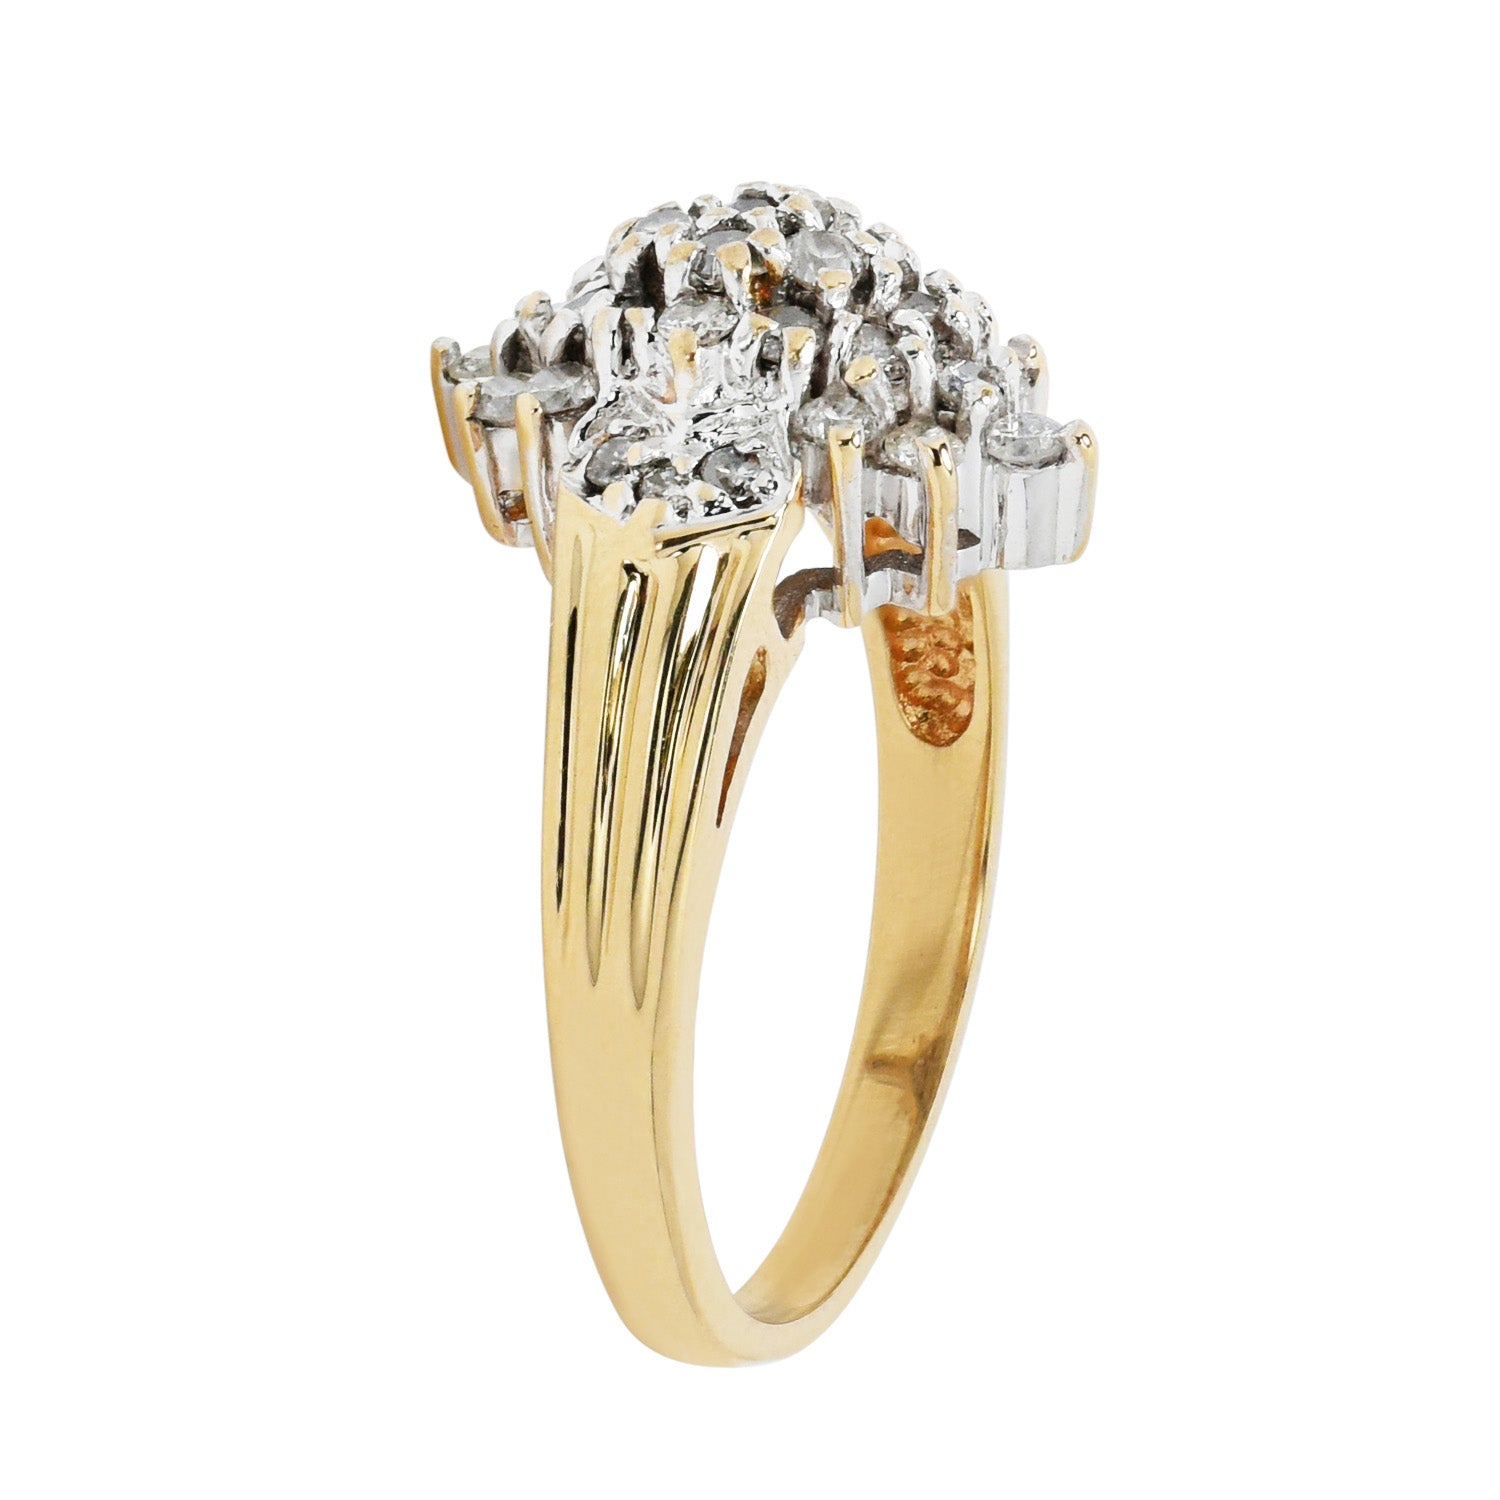 Estate Diamond Fashion Ring in 14kt White and Yellow Gold (5/8ct tw)